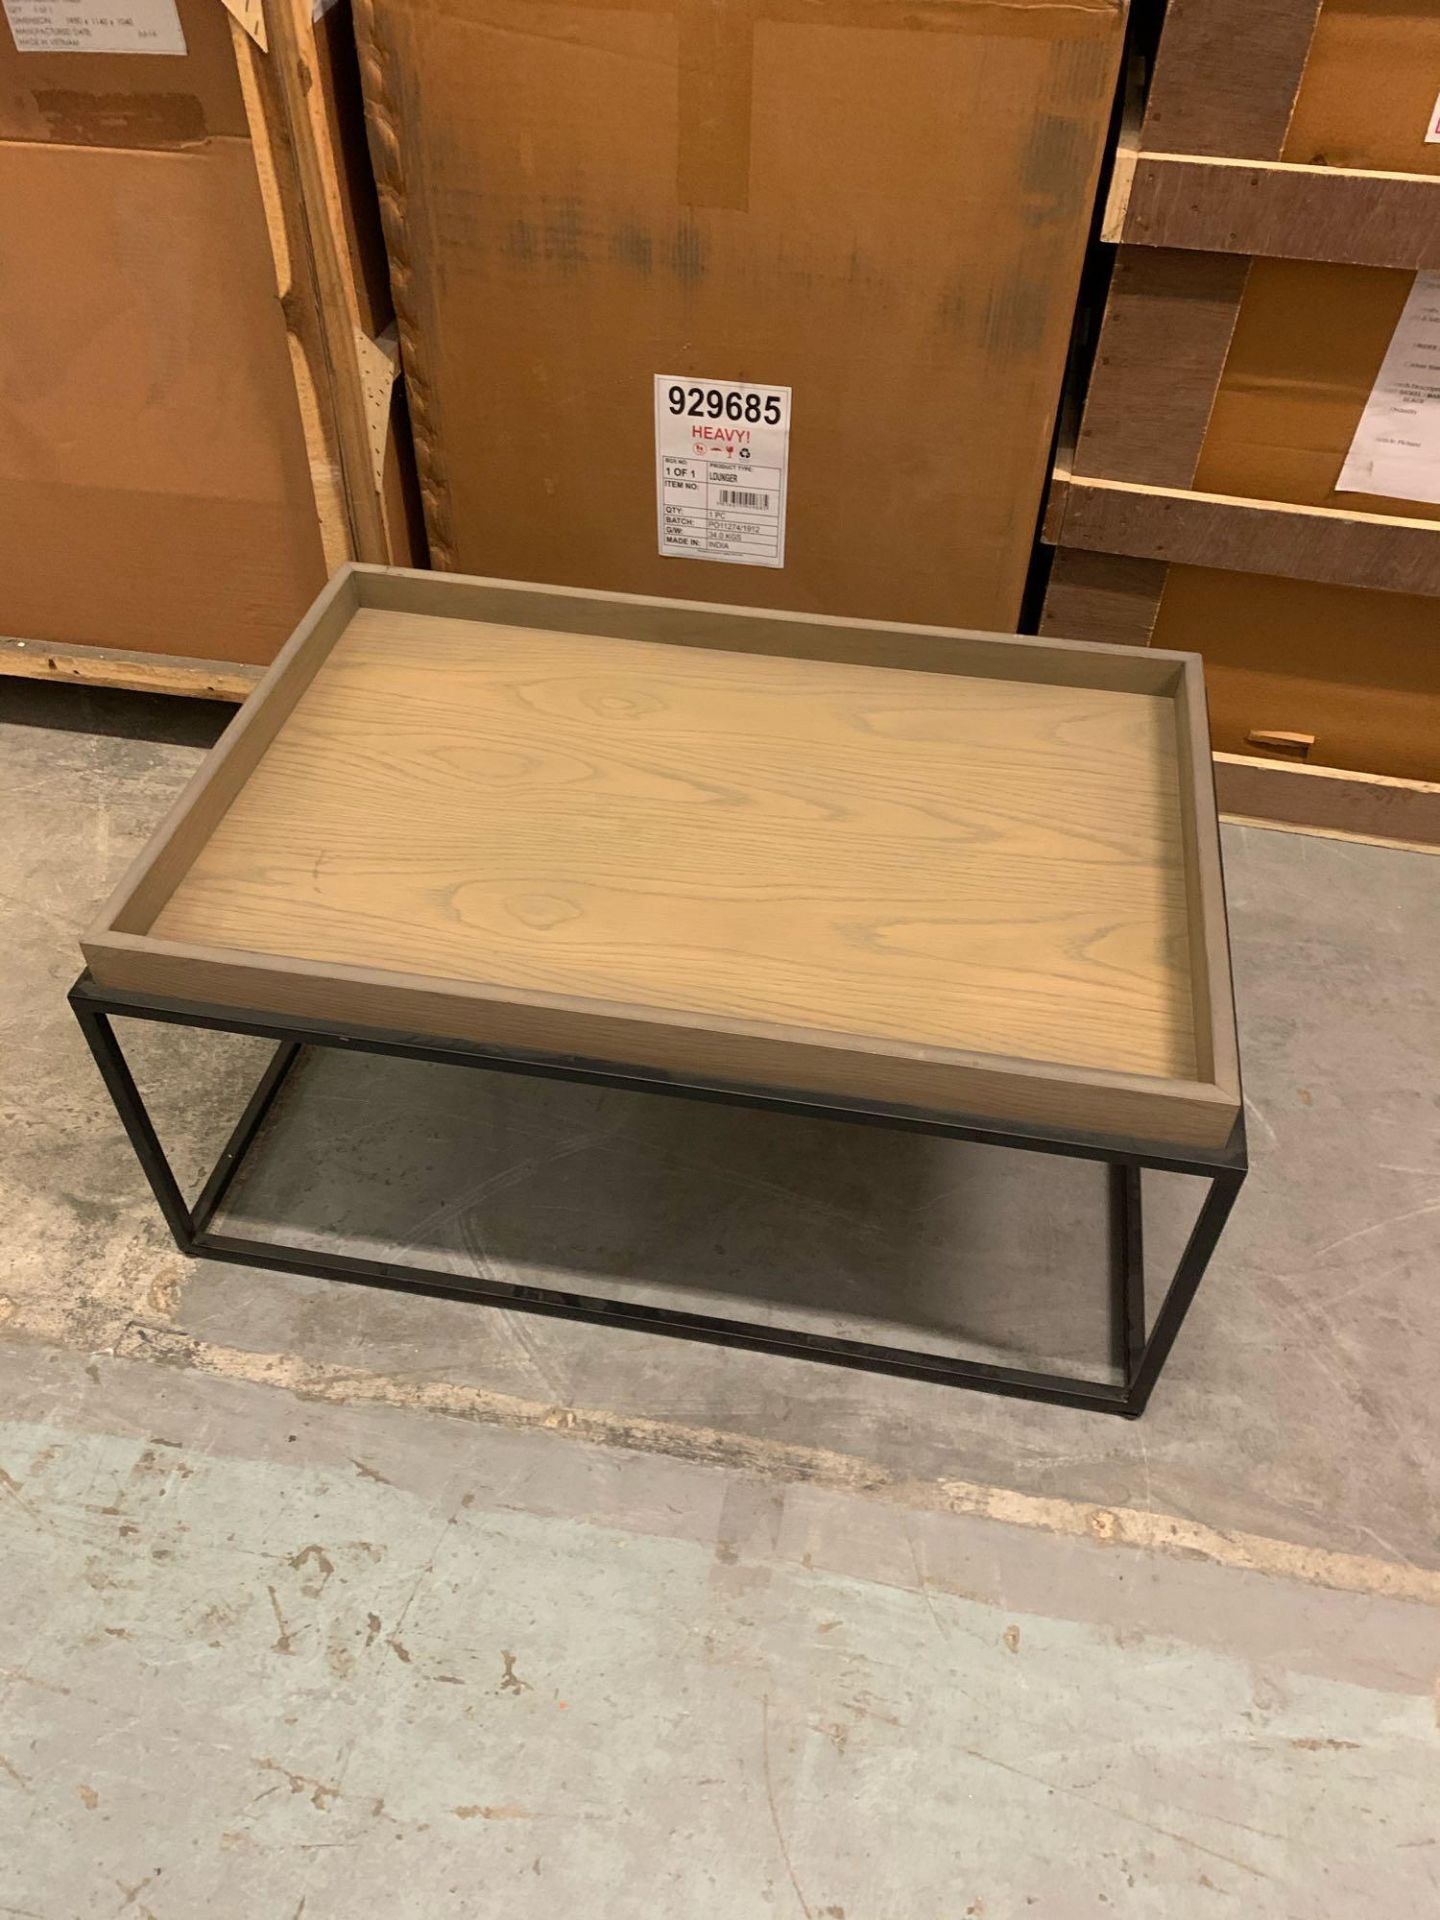 Forden Tray Coffee Table Grey W900 x D600 x H400mm - Image 2 of 5